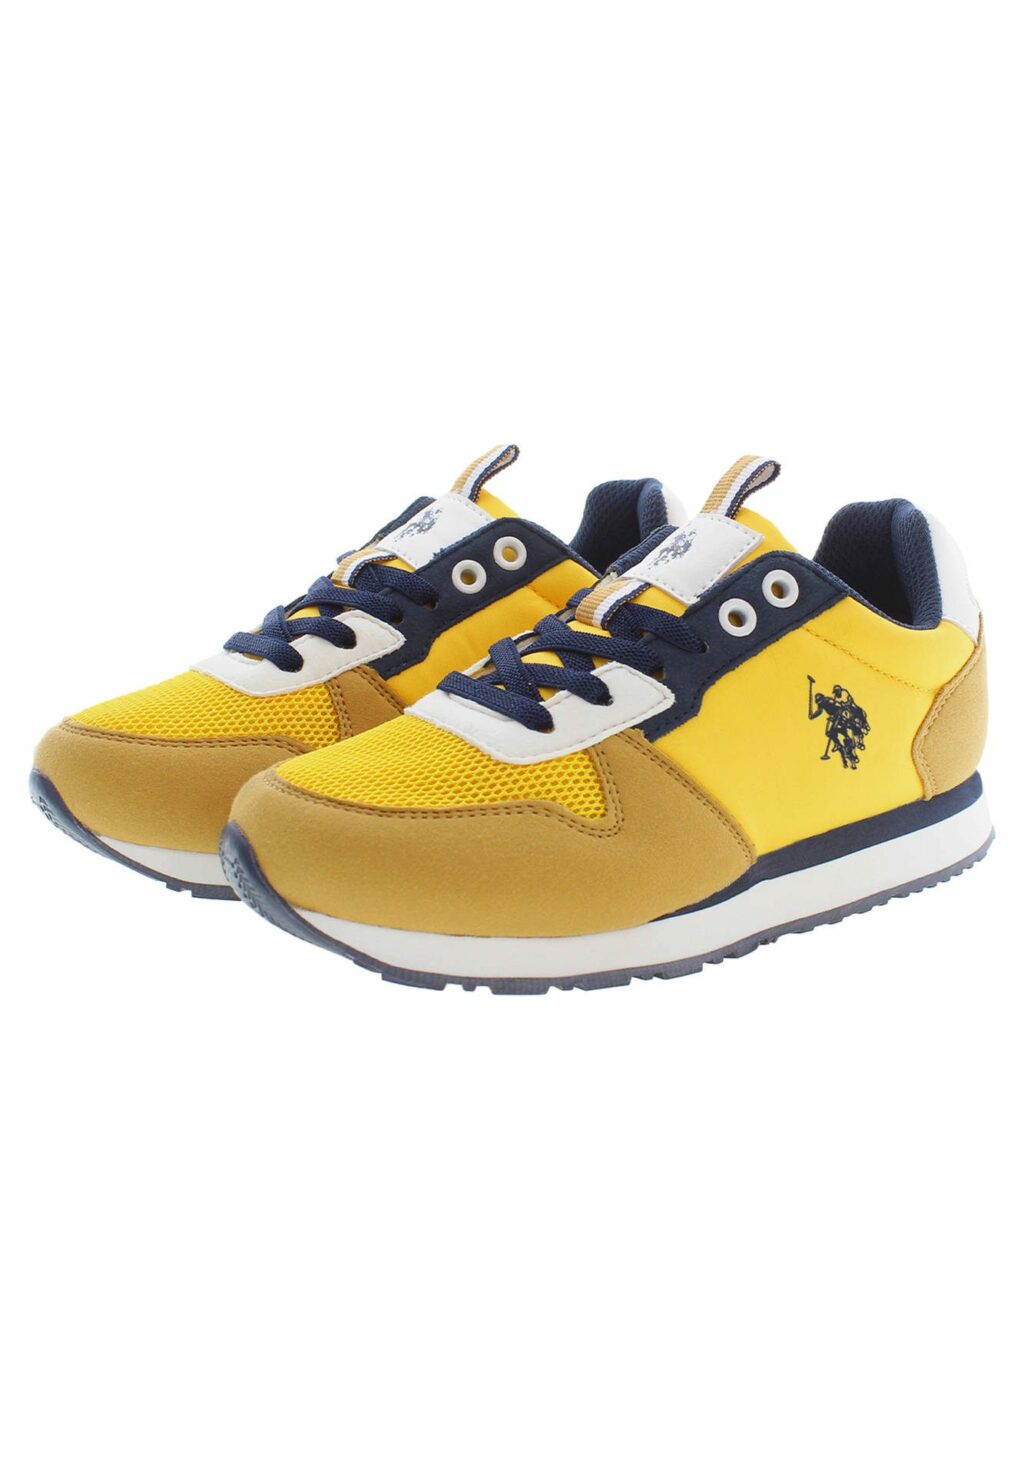 US POLO BEST PRICE YELLOW KIDS SPORT SHOES NOBIK008K3TH1_GIALLO_YEL